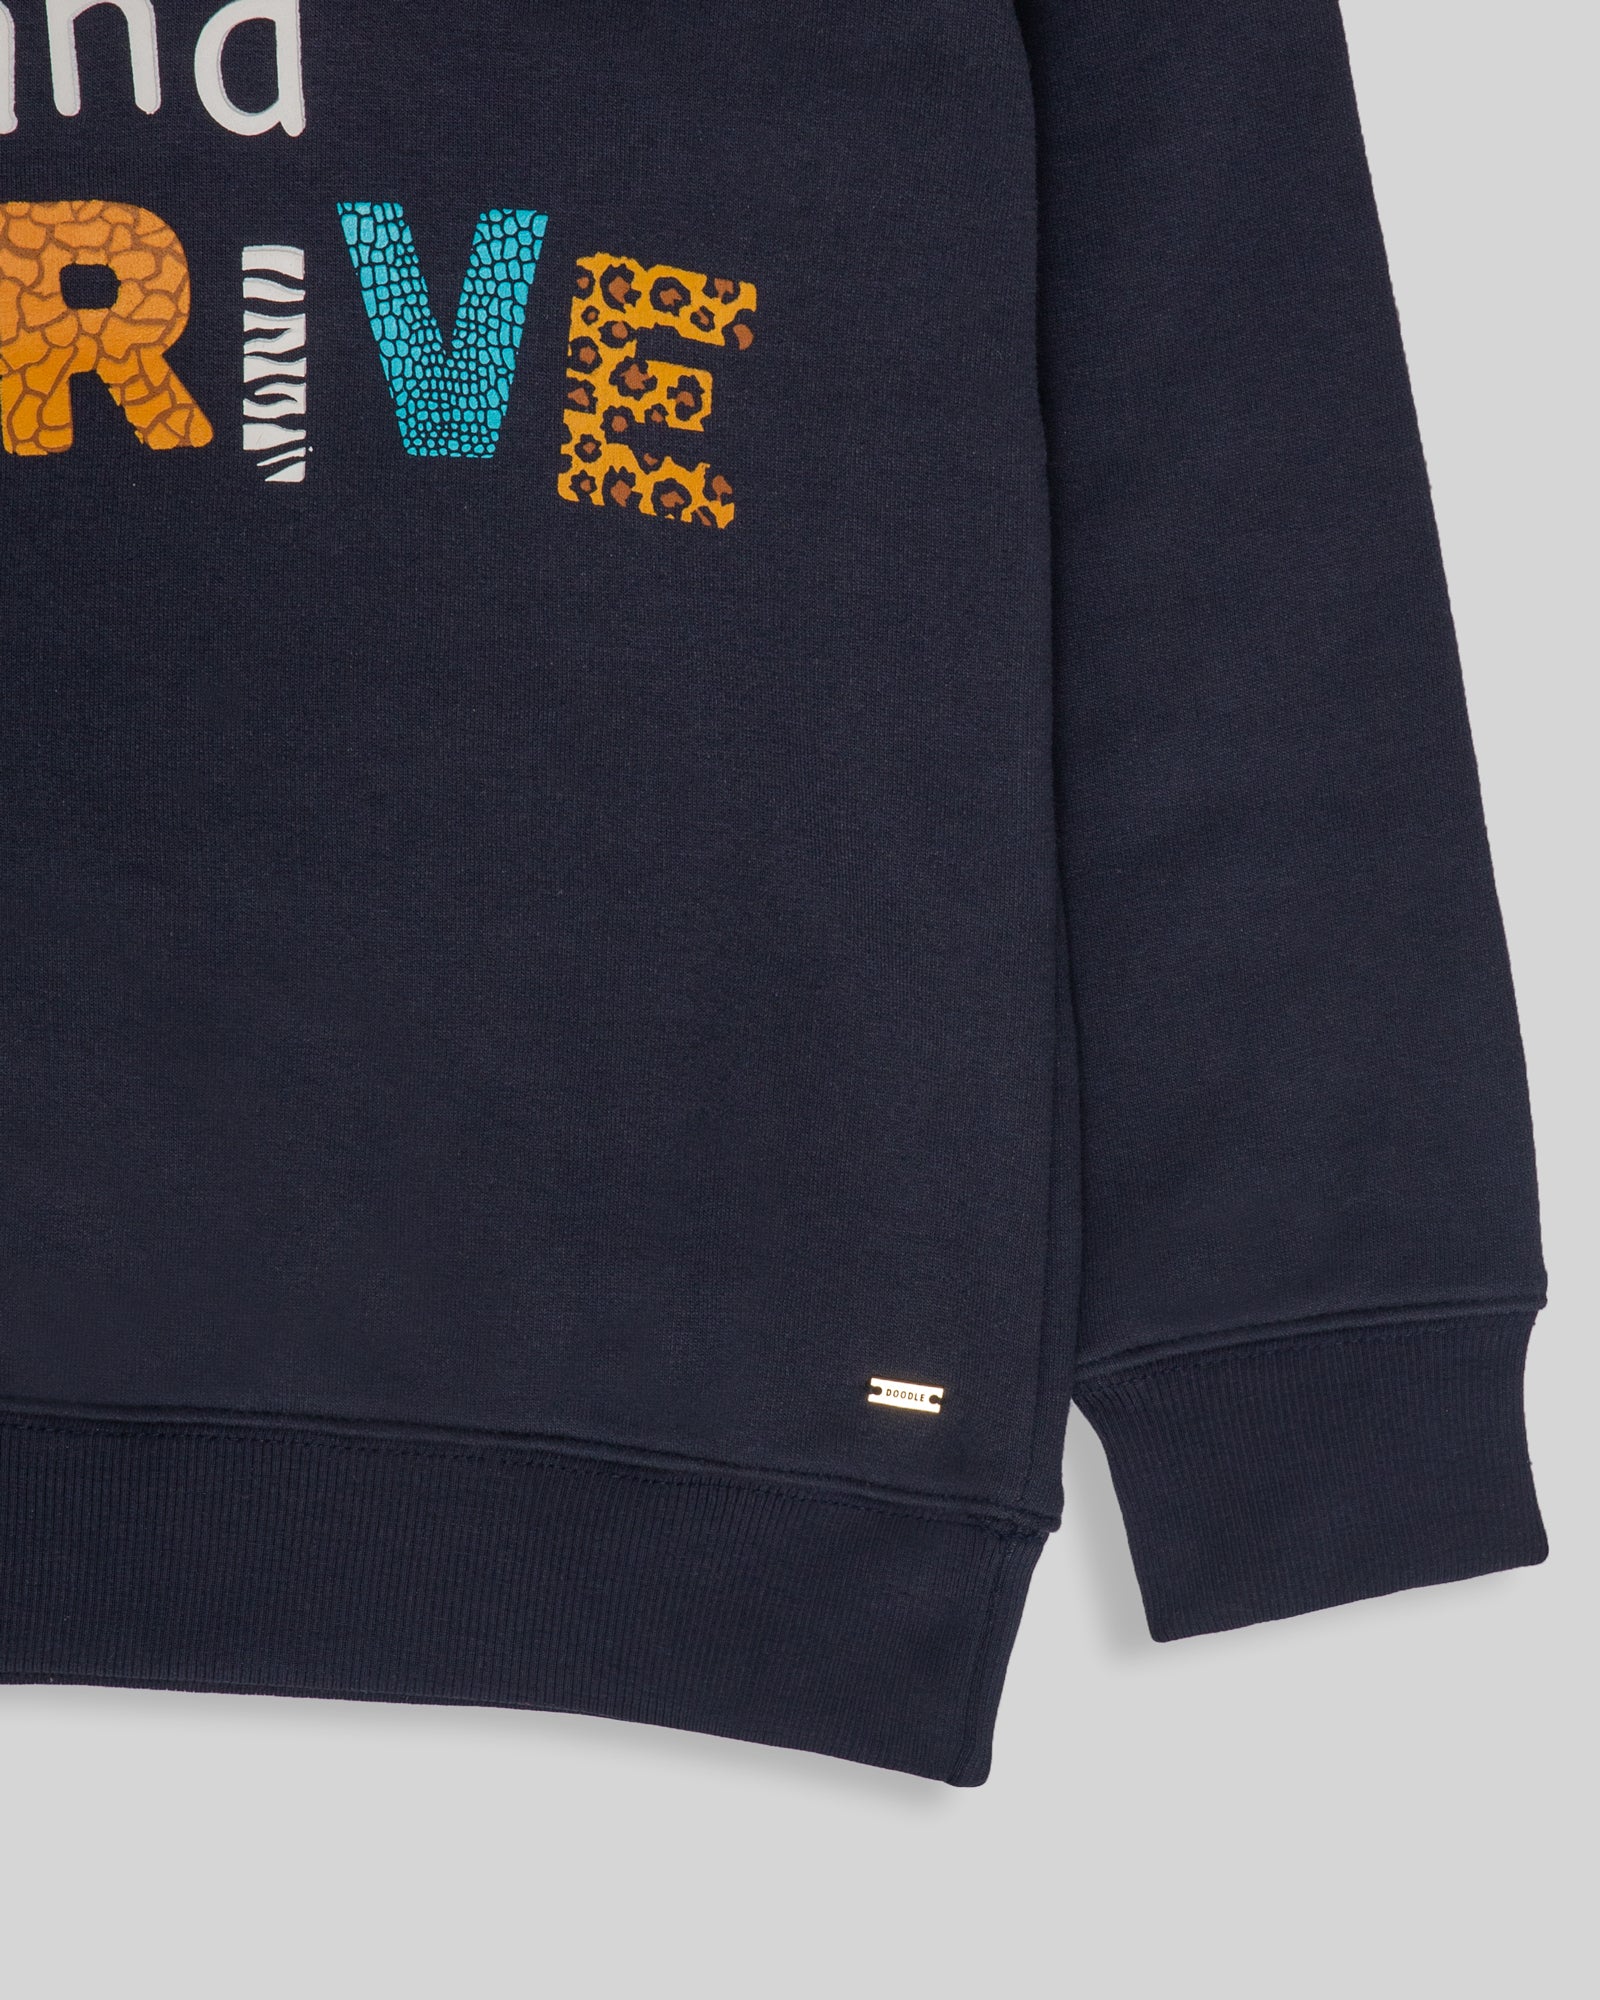 Grow And Thrive Graphic Sweat Shirt navy blue